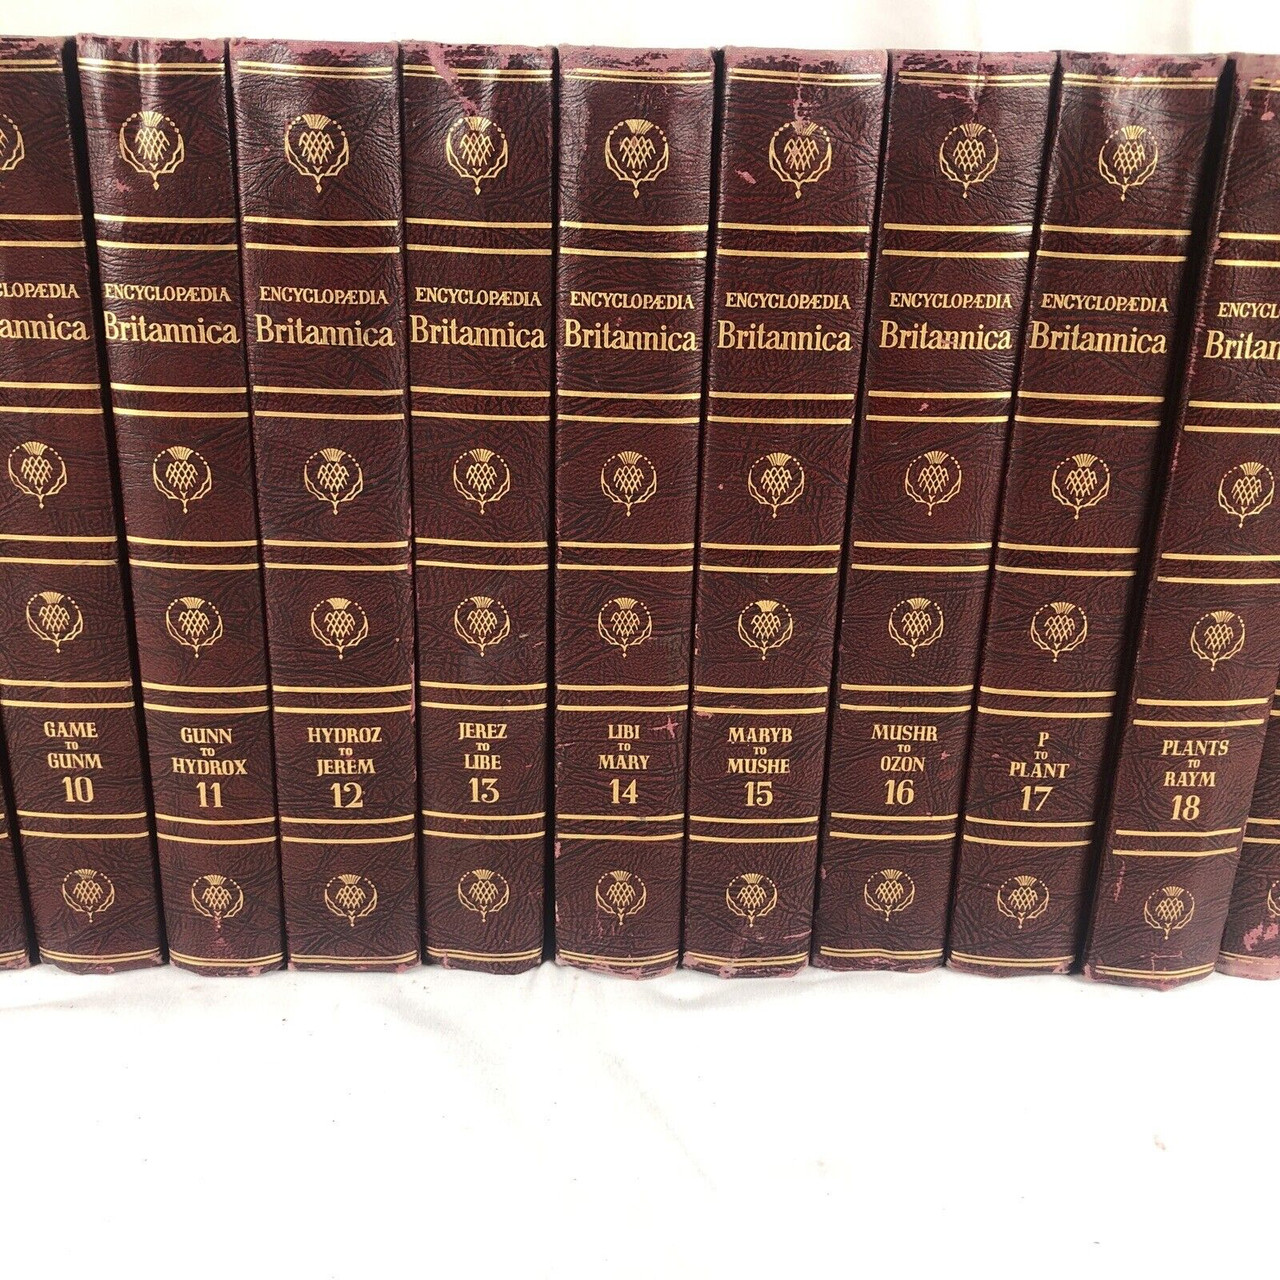 Encyclopedia Britannica 1960 Edition Full Set 24 Volumes with Free Shipping  in USA